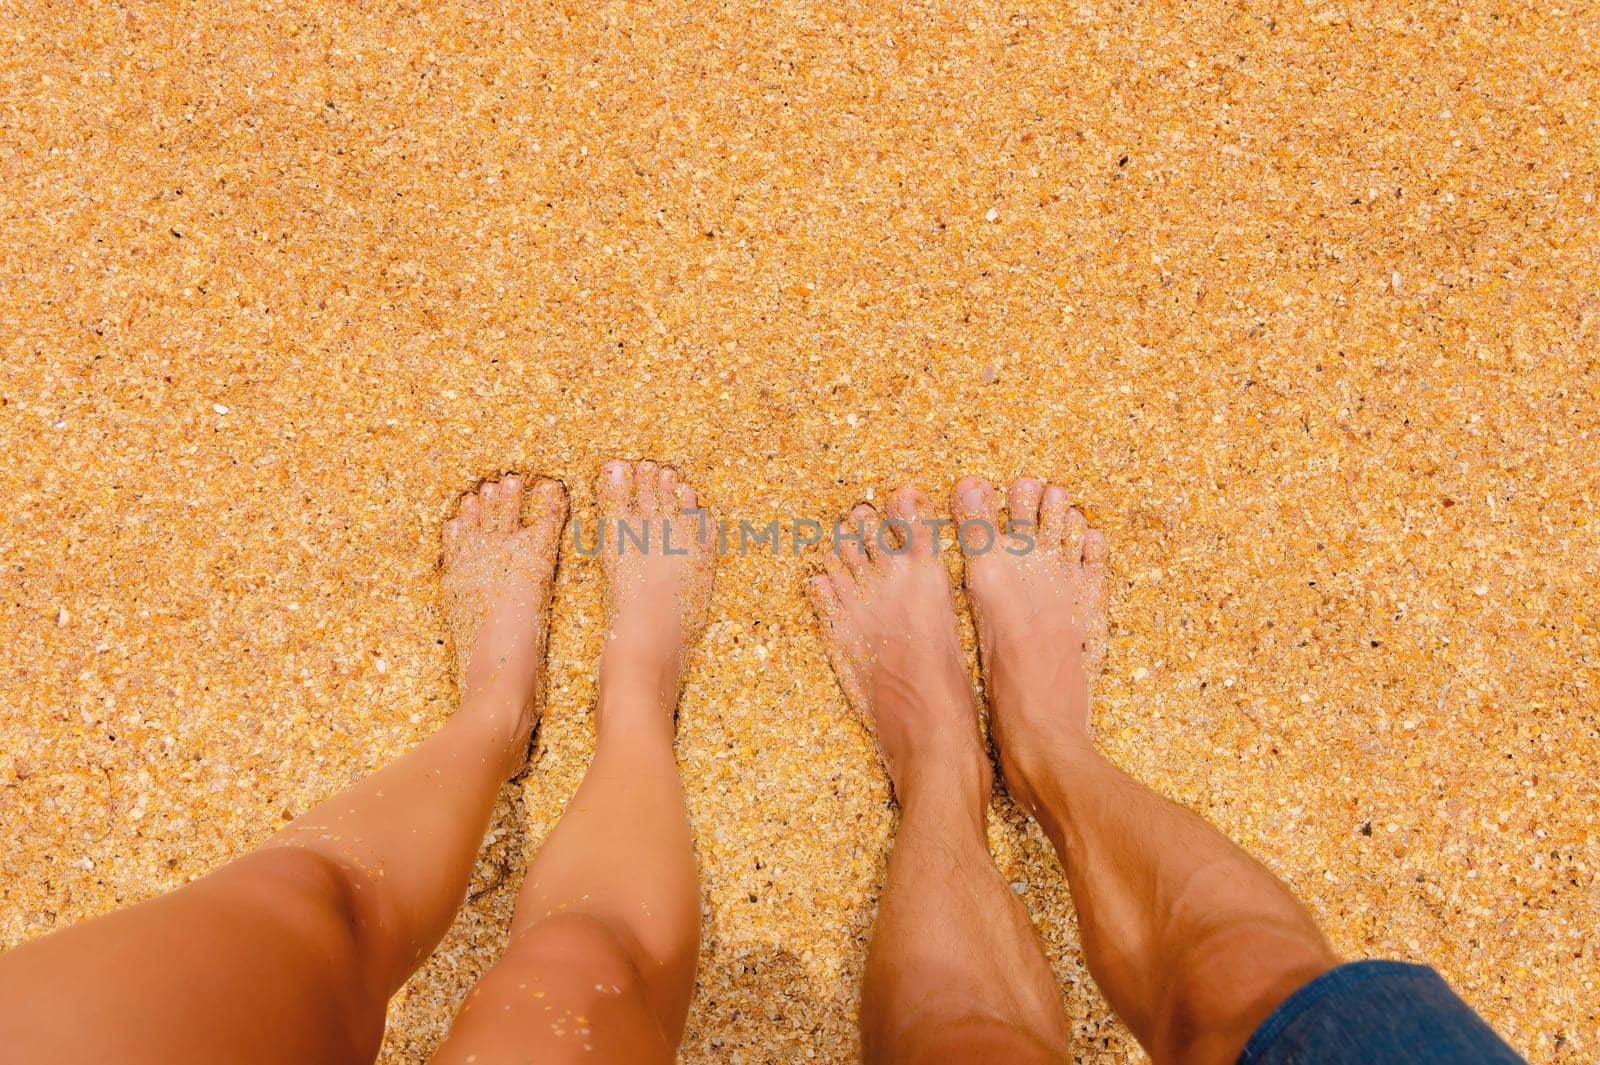 A man and a woman stand barefoot on the sand on the beach. Pair of feet in nature, summer vacation trip, outdoor date. Close-up, first person view